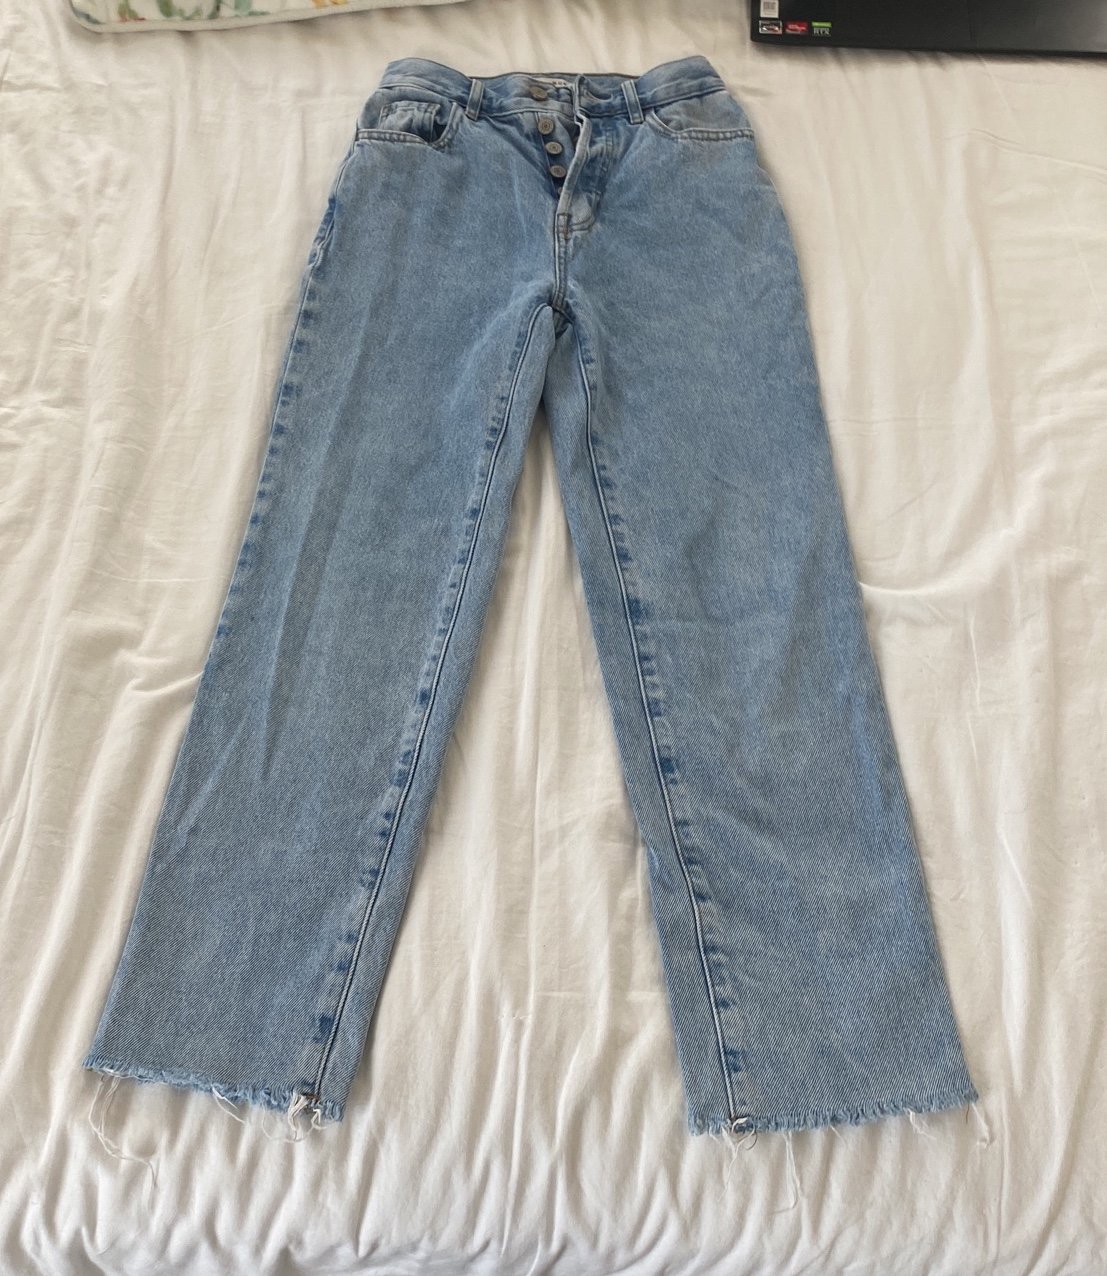 reasonable price Pacsun Straight Jeans hkkxIQVd0 just b